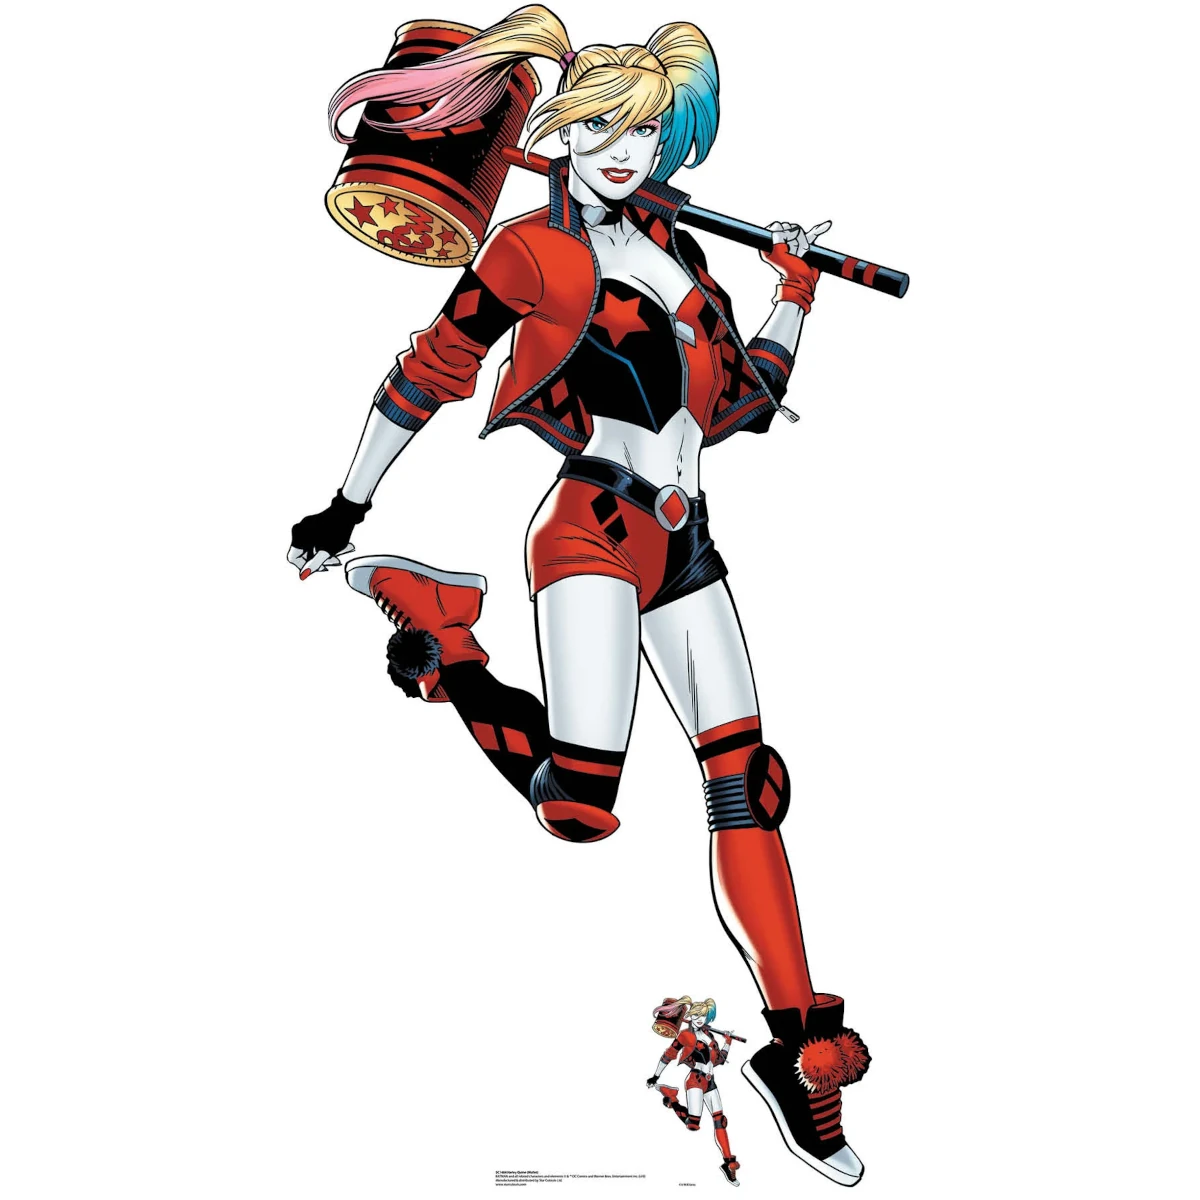 SC1464 Harley Quinn 'Mallet' (DC Comics) Official Lifesize + Mini Cardboard Cutout Standee Front